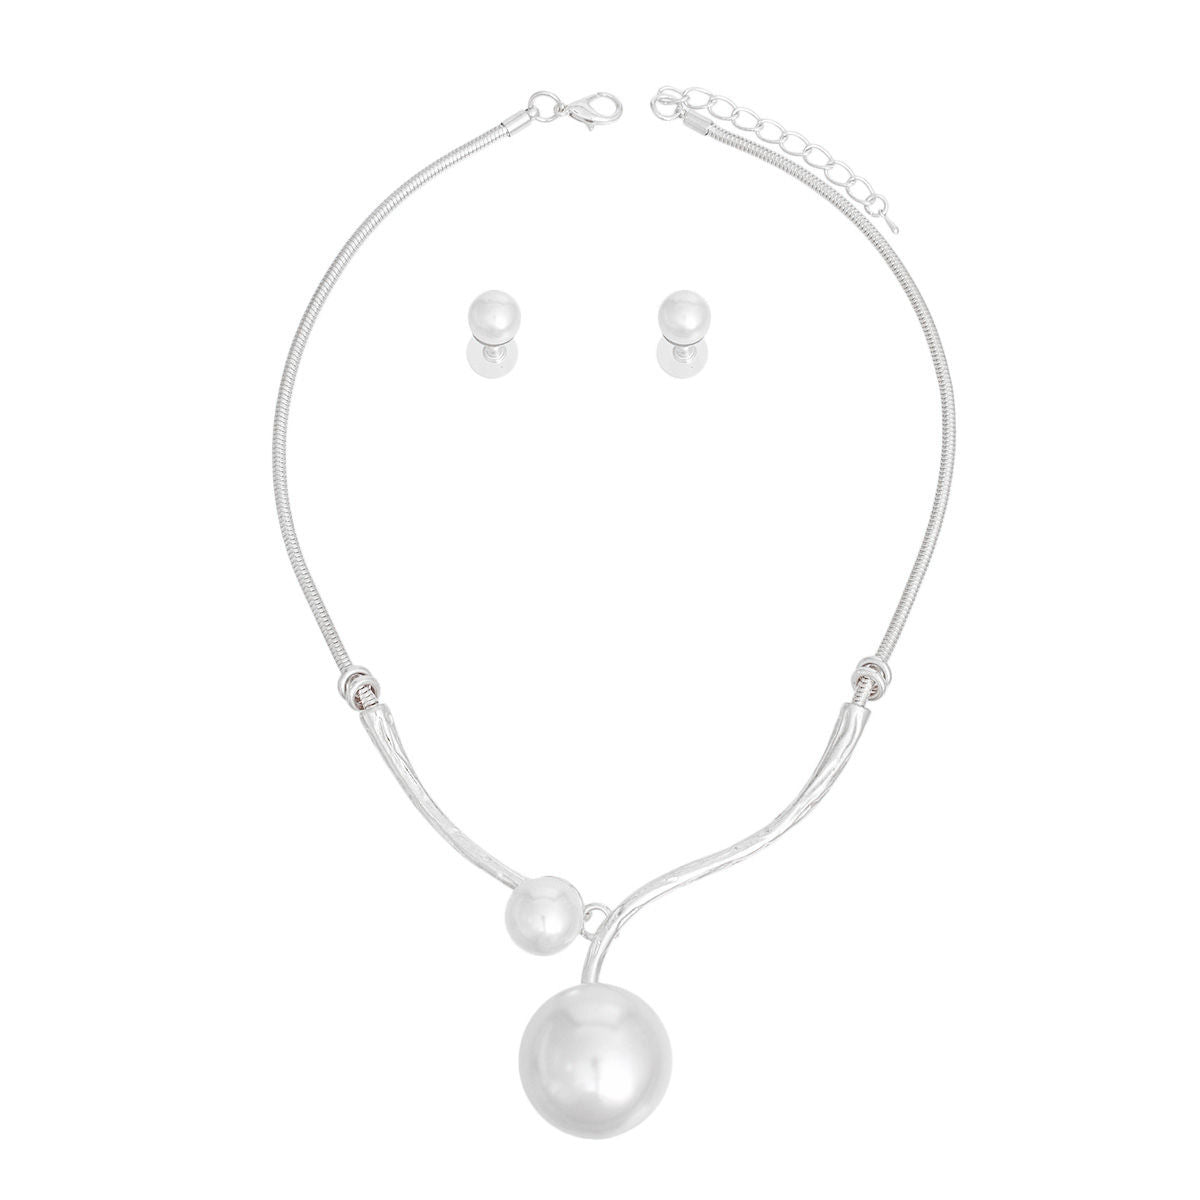 Necklace Silver Snake Chain Pearl Set for Women